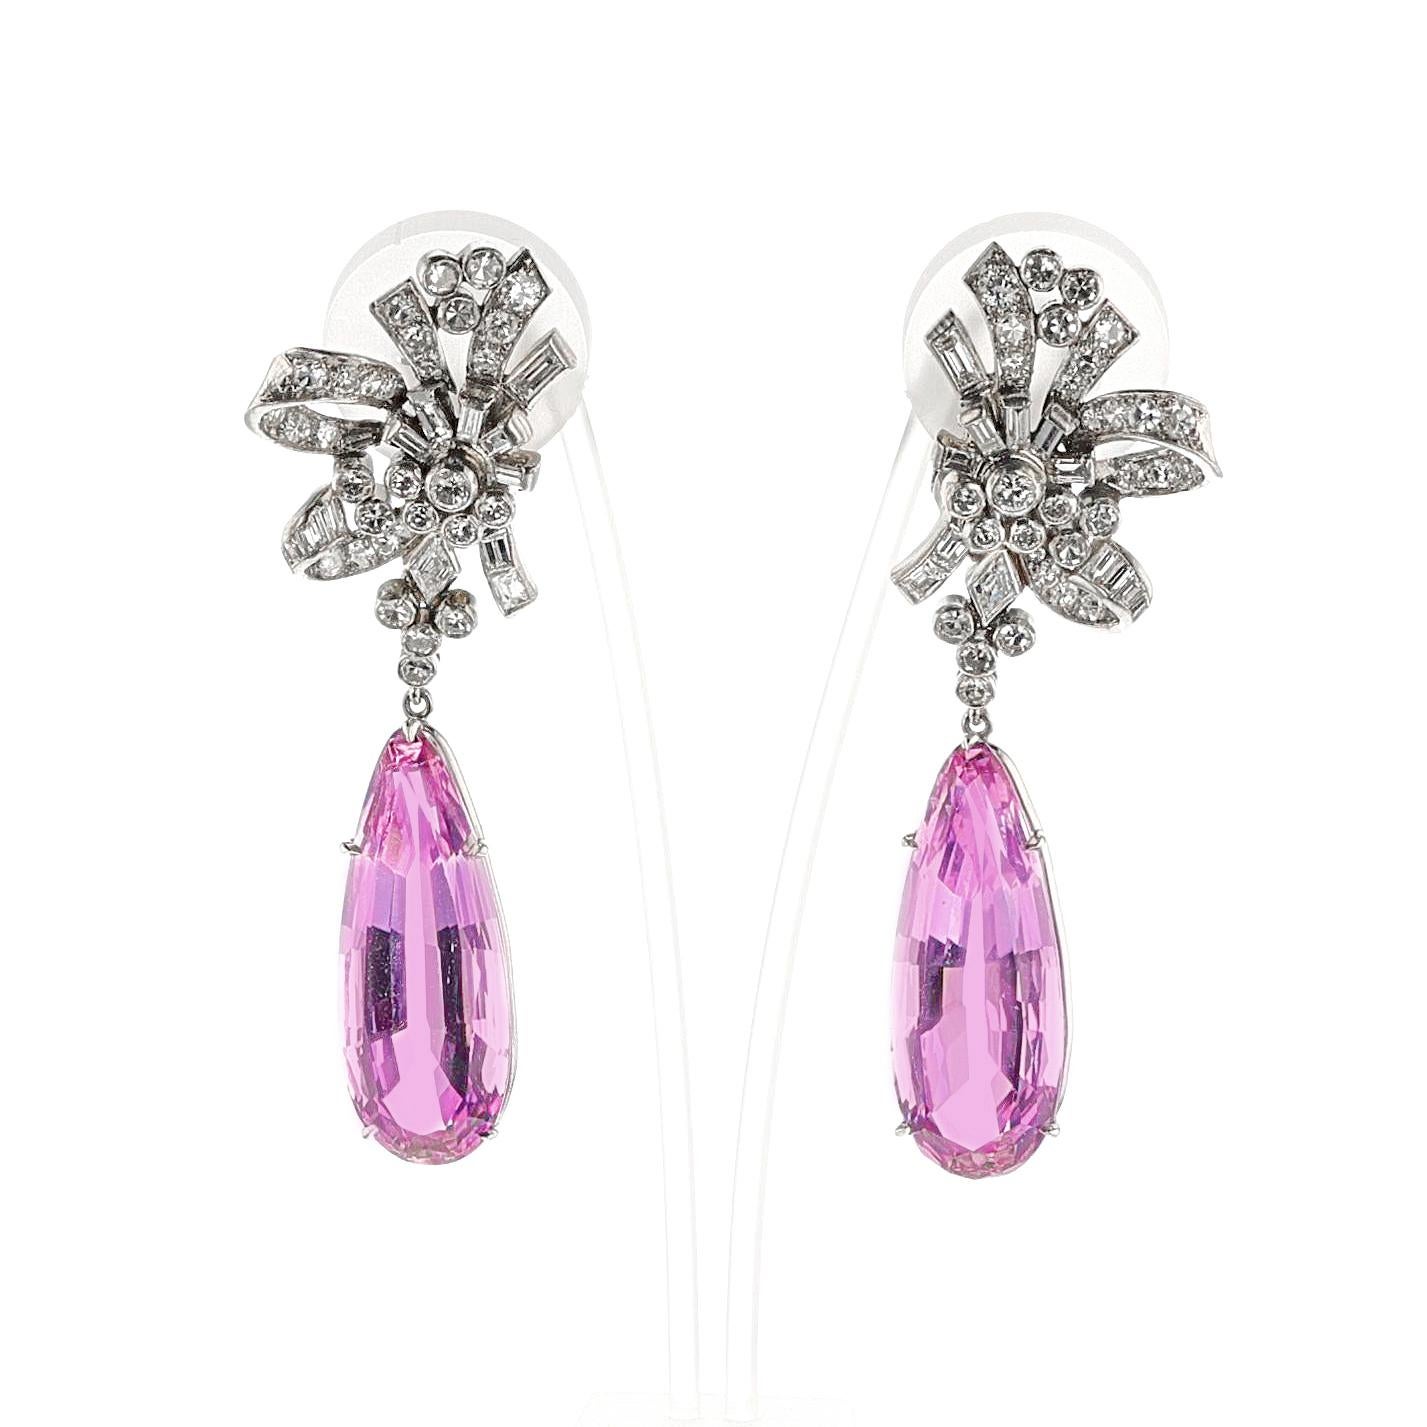 A pair of Art Deco AGL Certified Natural Pear Shape Pink Topaz and Diamond Earrings made in Platinum. The diamonds are single cut. The Natural Pink Topaz pair weighs 14.56 carats and 13.03 carats. The Diamond weight is appx. 5.50 carats. Earrings